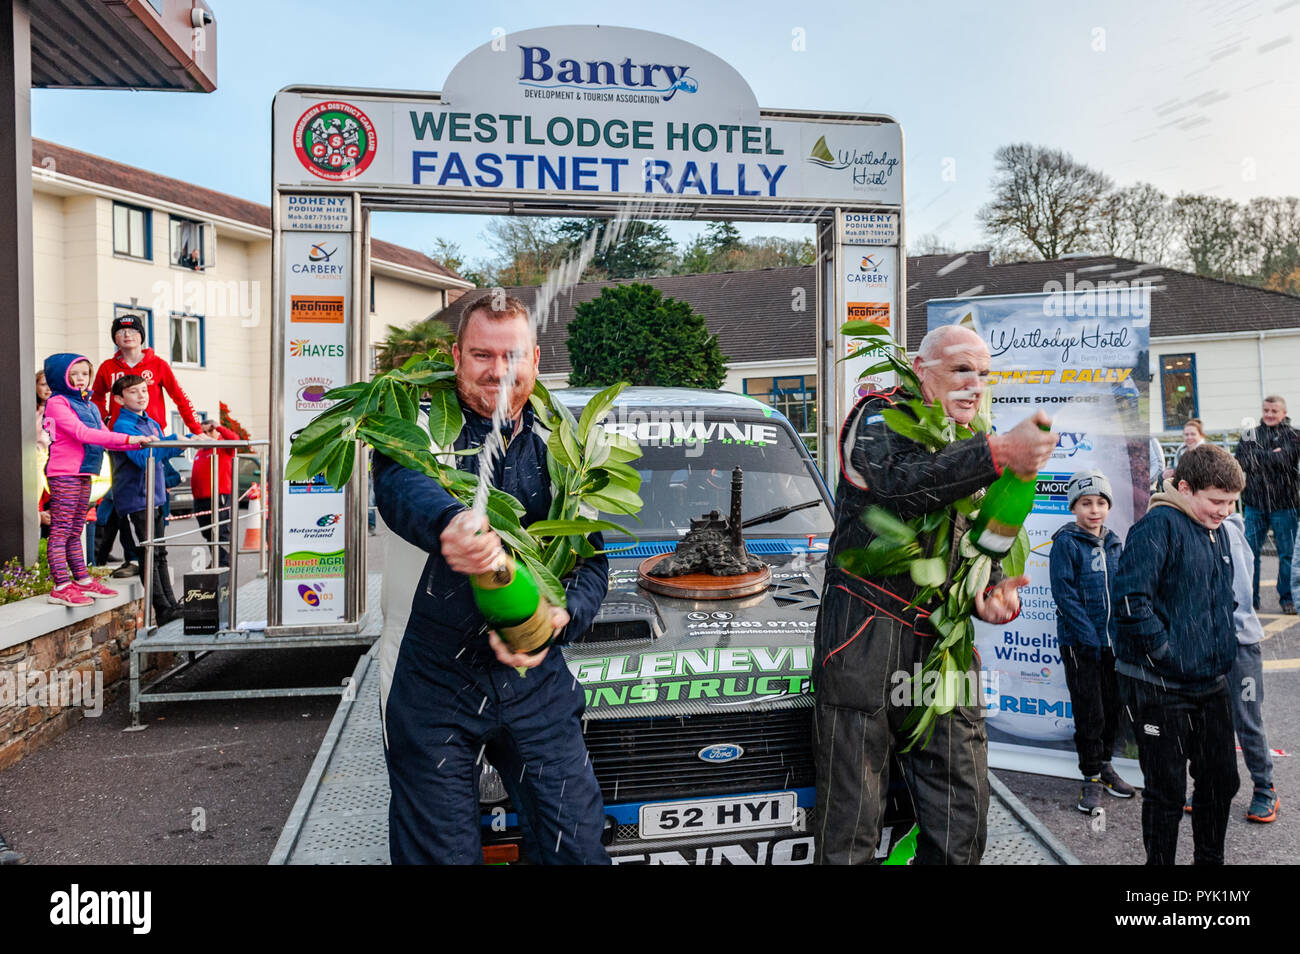 Bantry, West Cork, Ireland. 28th Oct, 2018. Winning rally team Damien Tourish, and Domhnall McAlaney, spray the crowd with champagne at the end of the 2018 Fastnet Rally. Credit: Andy Gibson/Alamy Live News. Stock Photo